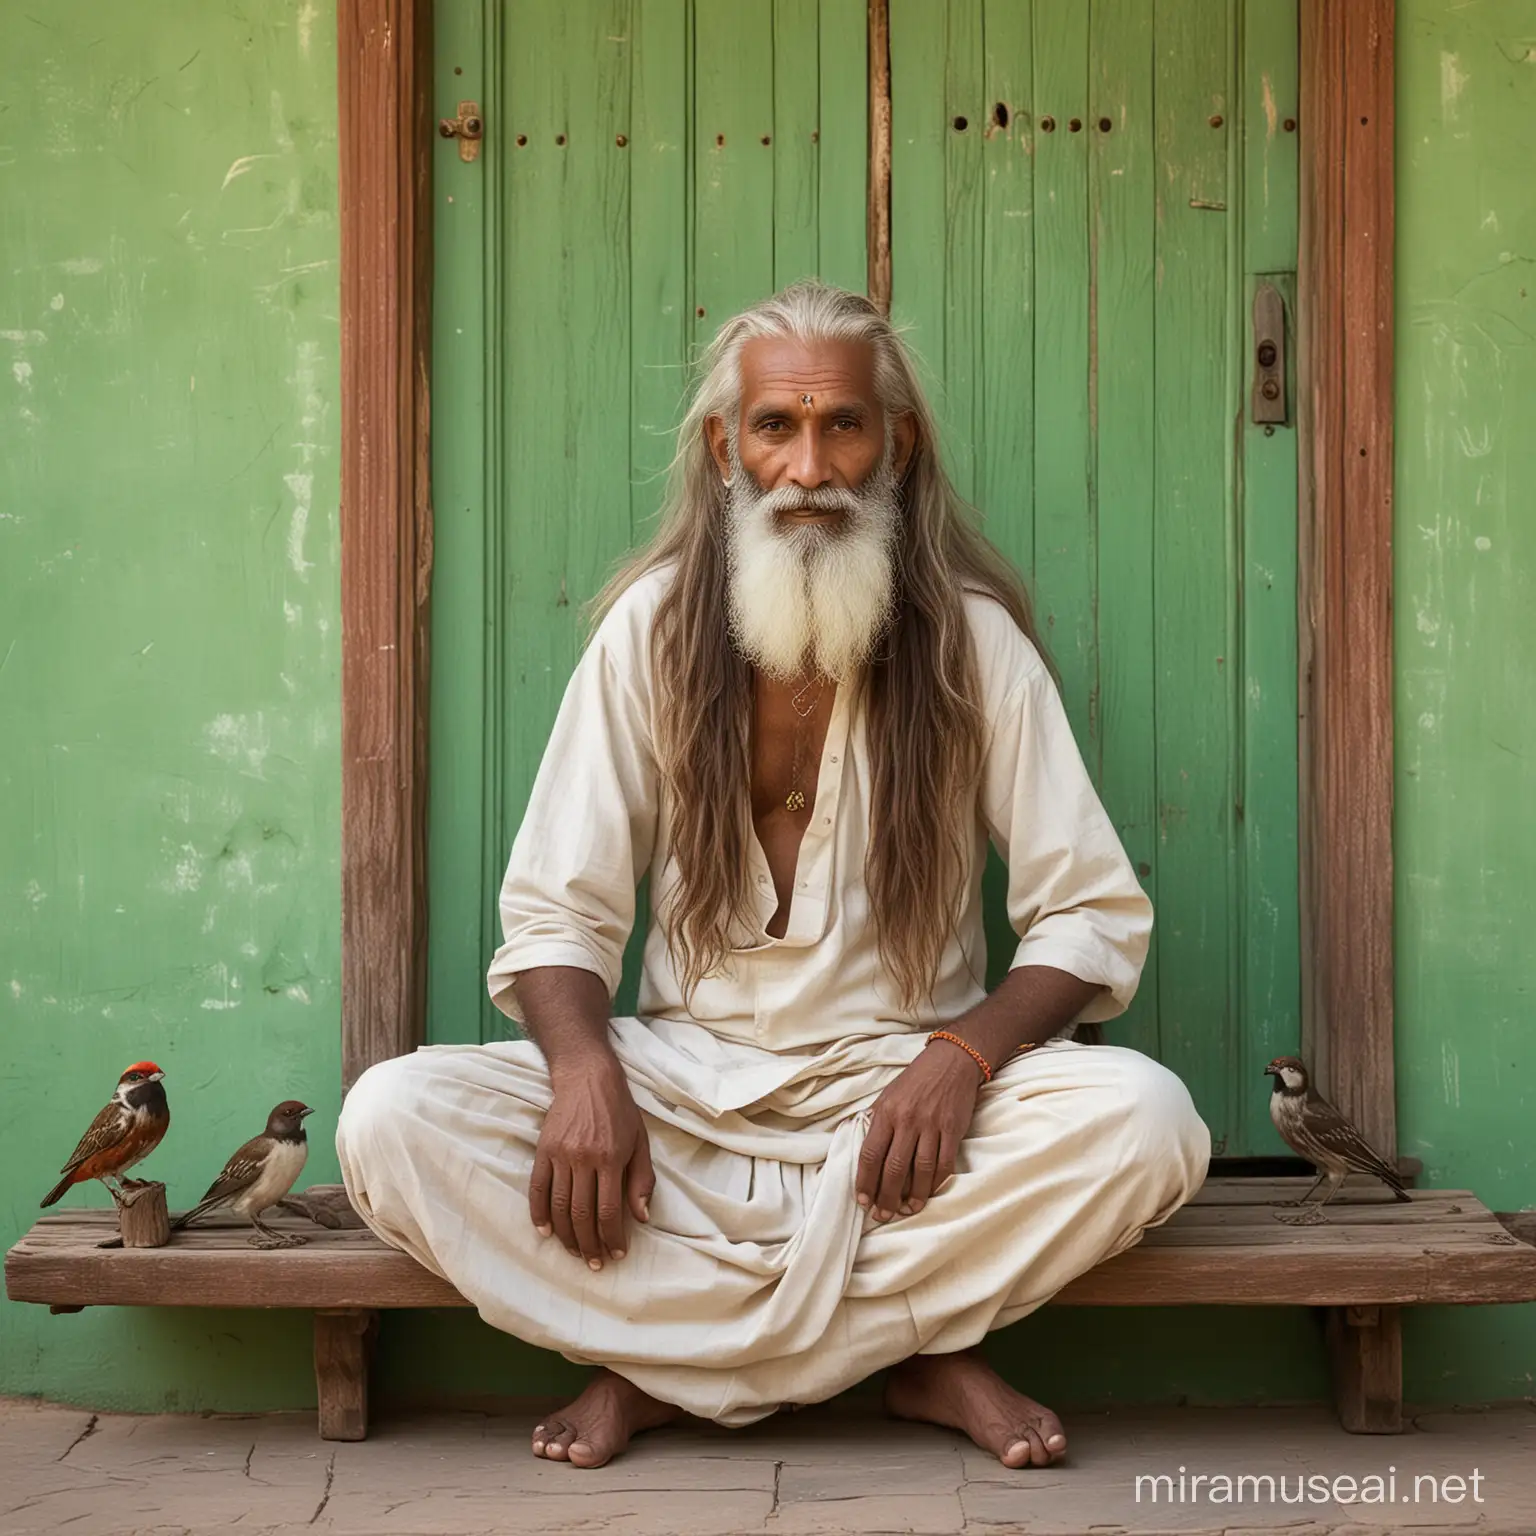 sadhu benares 70 years thin white painted skin brown long hair and beard full total body is sitting on a wooden bench    background a light green wall some birds flying around with old red rajasthan  door 35 mm fuji xt3